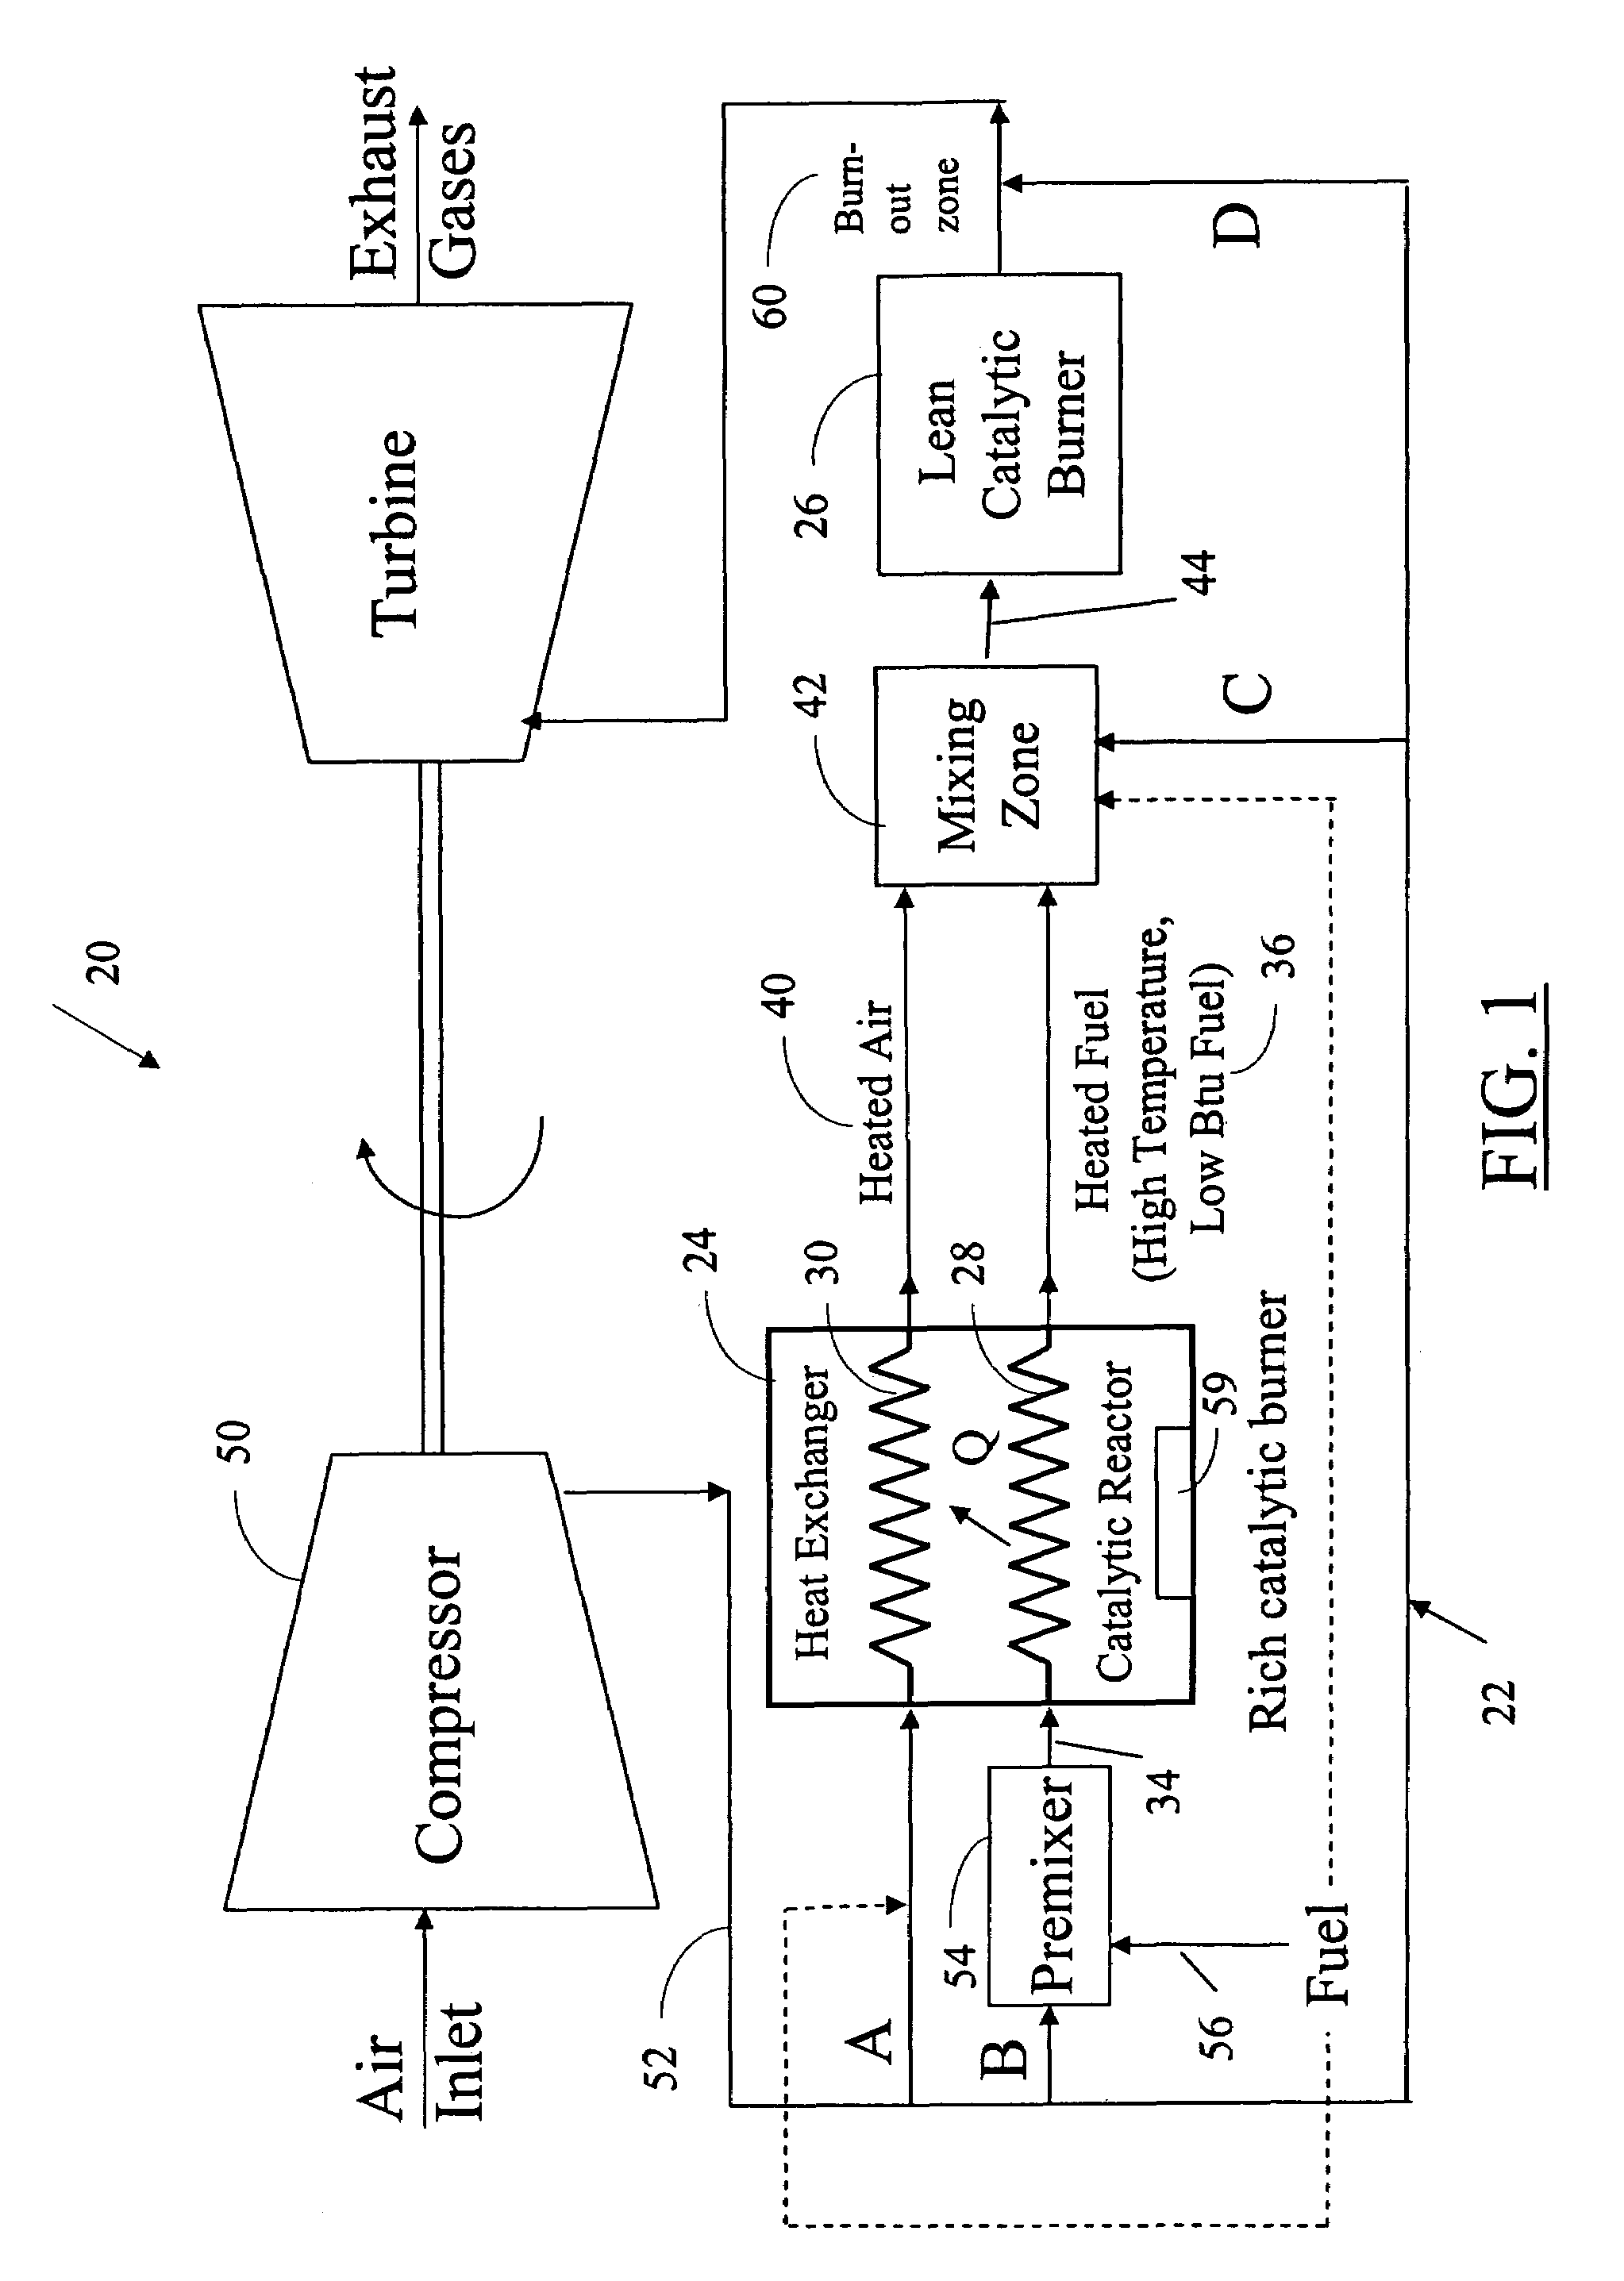 Method and system for rich-lean catalytic combustion